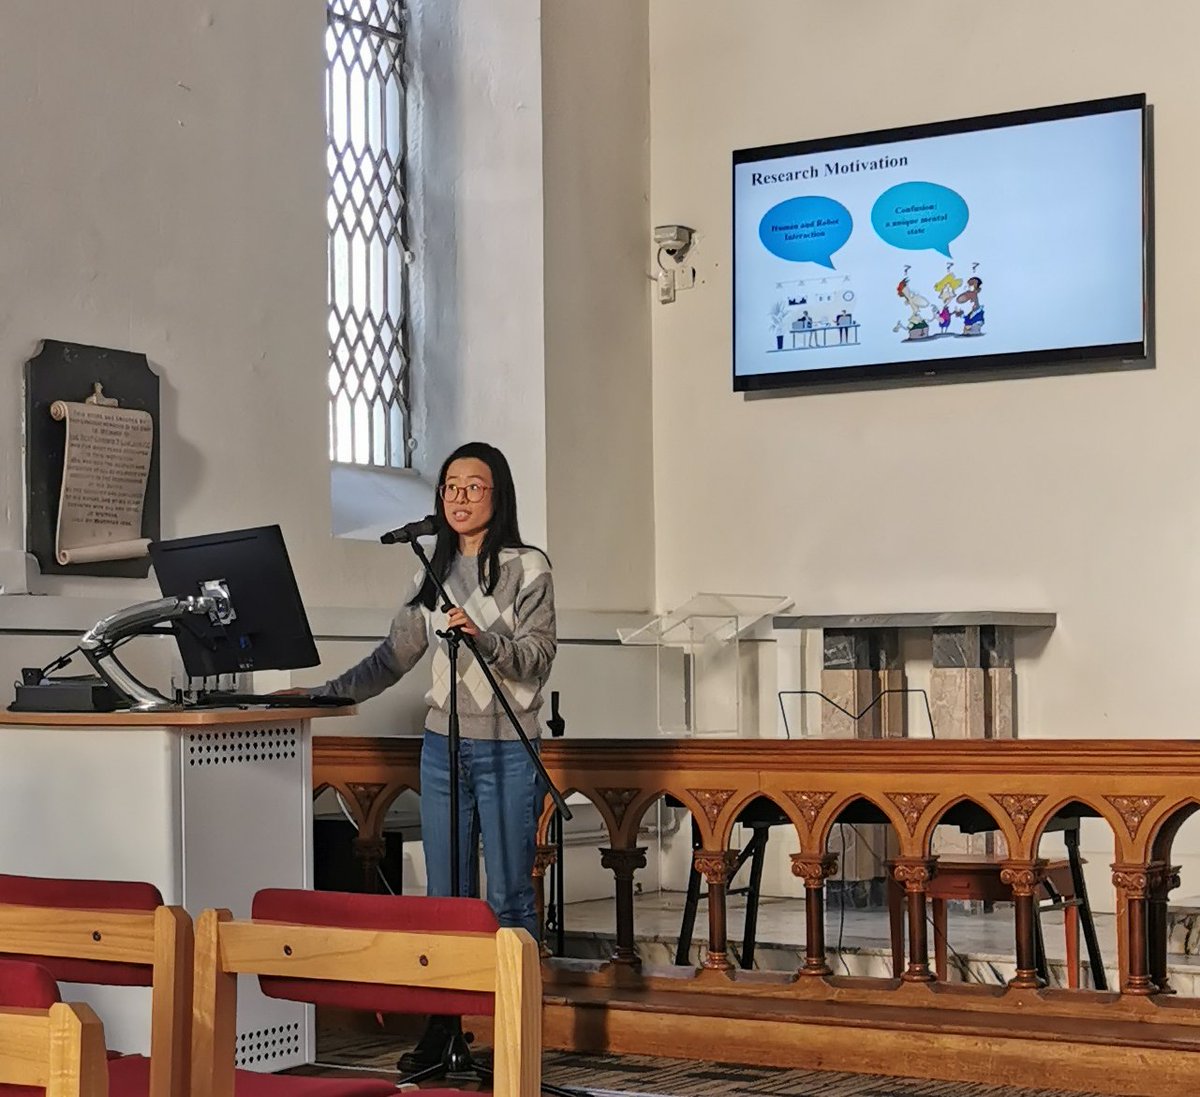 Really interesting talk from Na Li at the TU Dublin Graduate Research Symposium today. Na Li spoke about her research on 'Modelling Multilevel Interlocutor Confusion in a Situated Human-Robot Interaction'. Pity Pepper the robot could not be in attendance too. Next time.